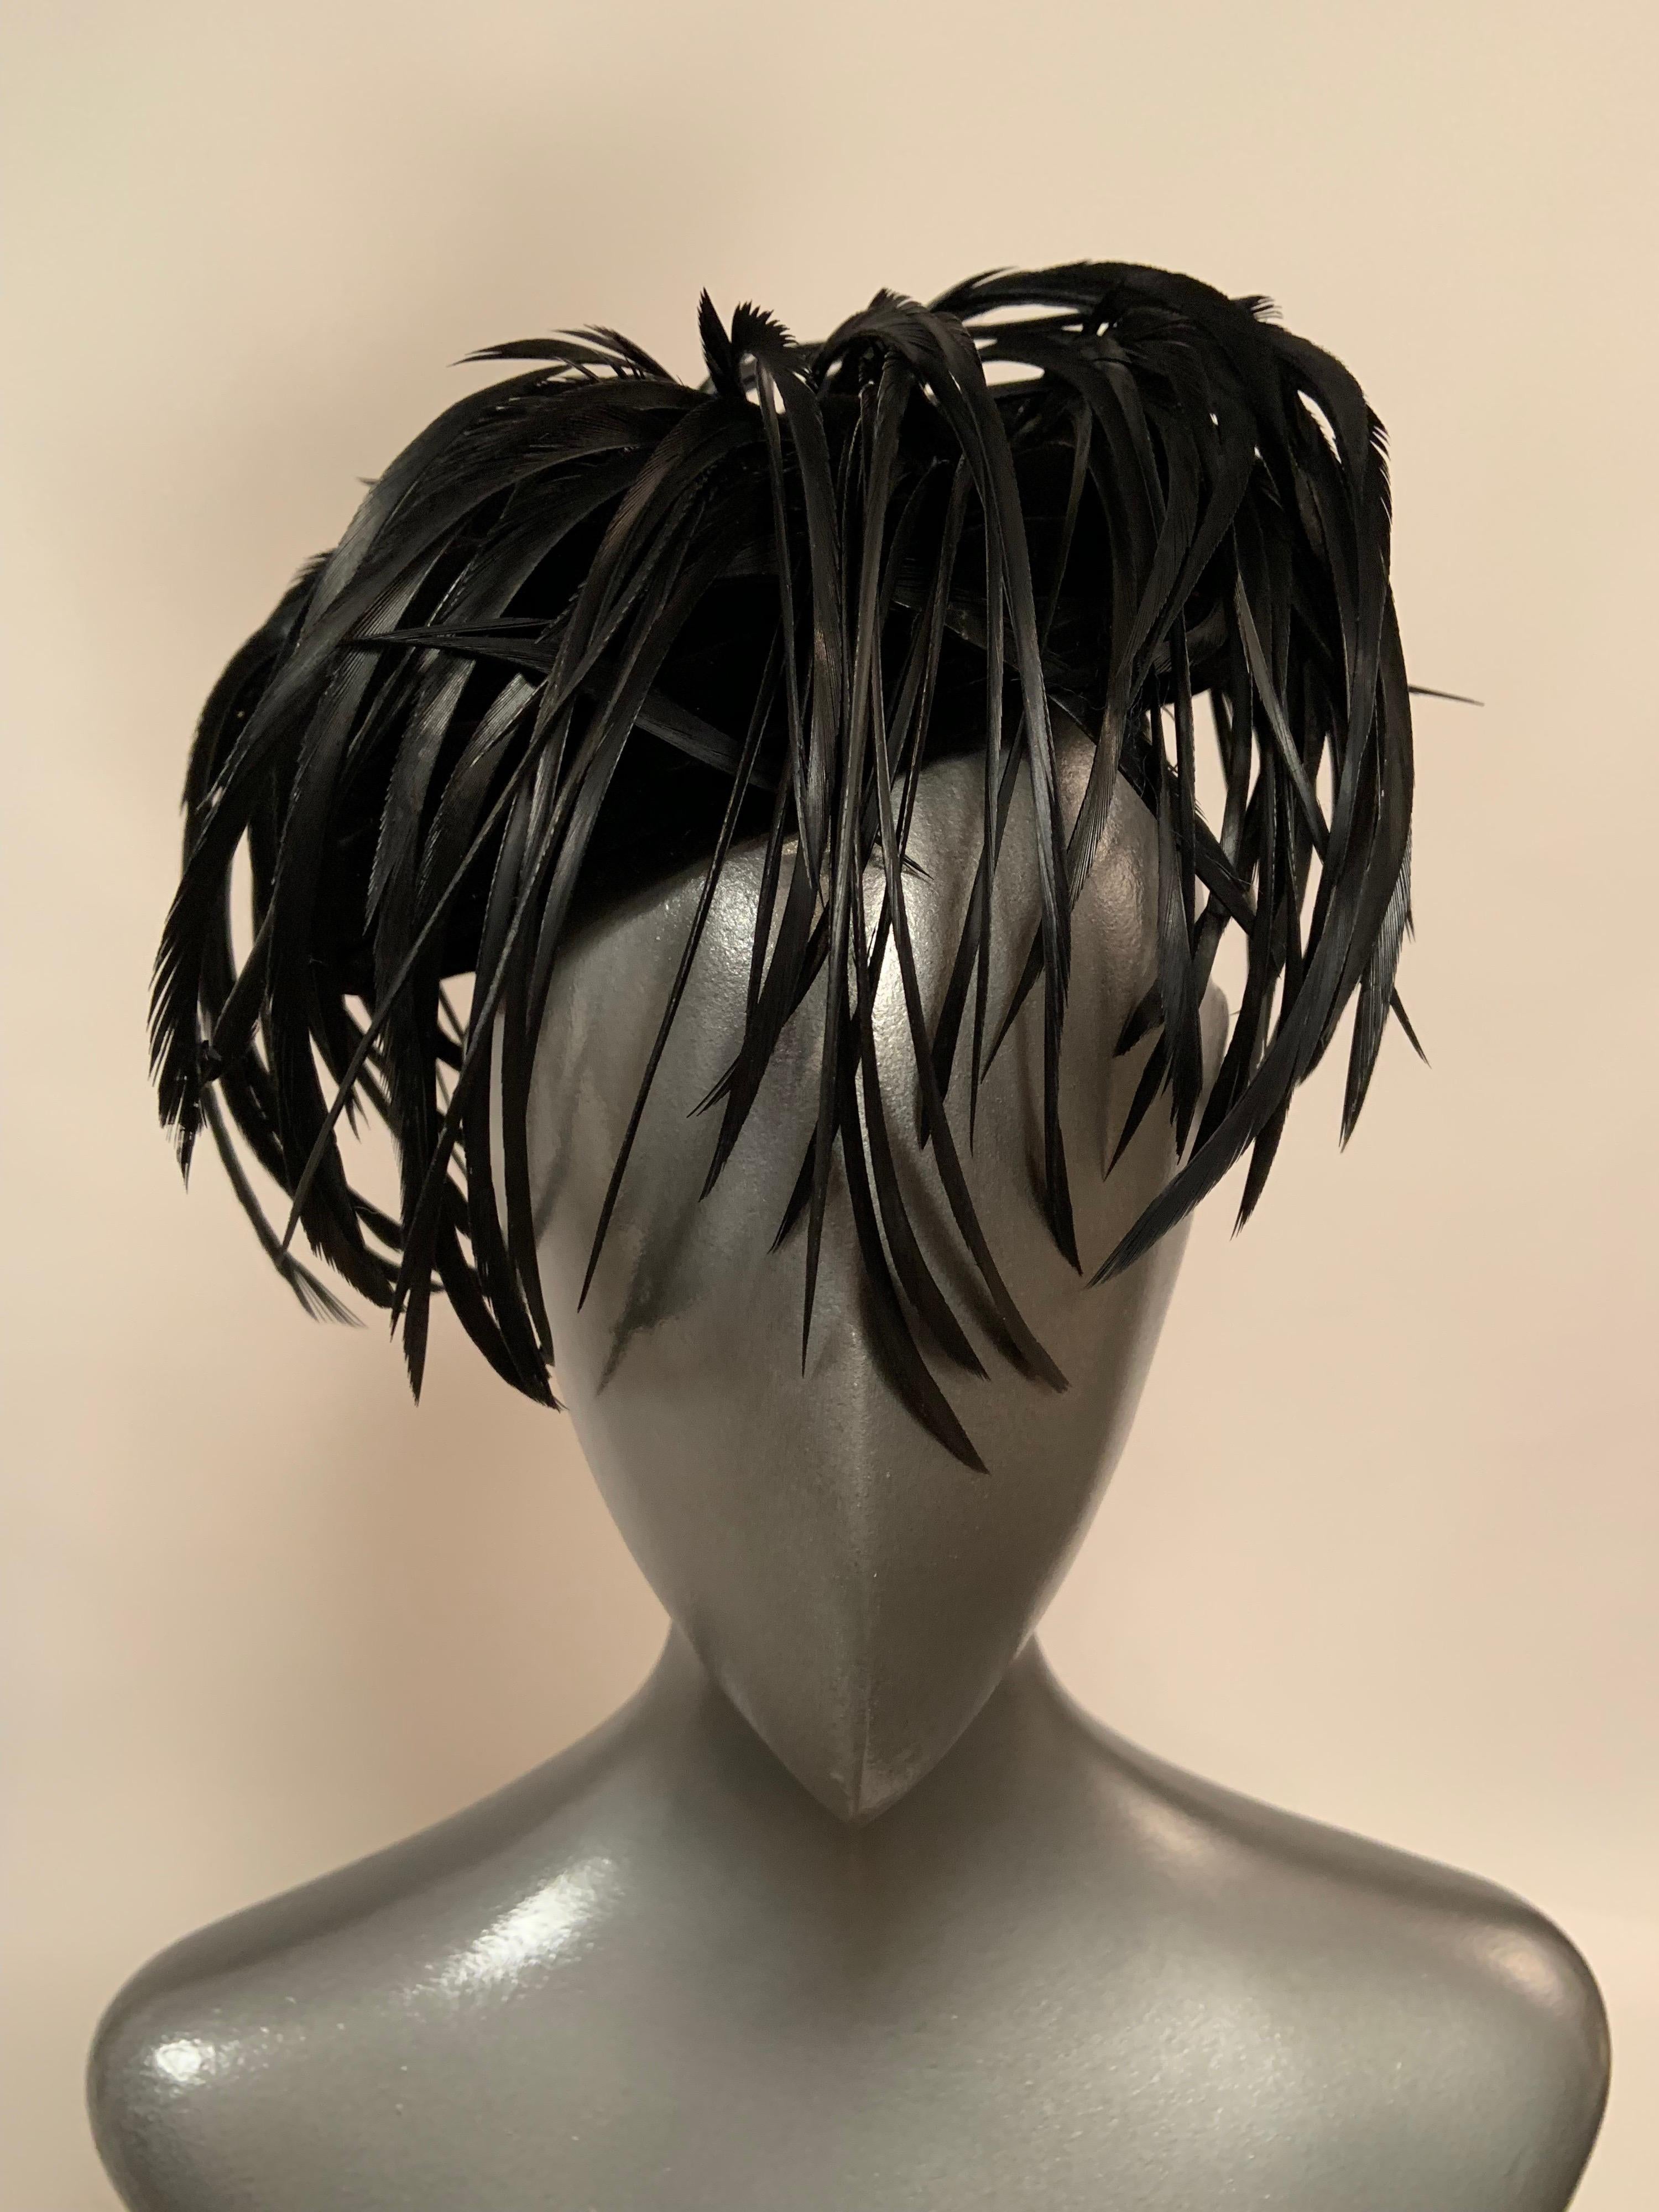 This is one of those very chic accessories that adds instant glamour to your evening look. The black velvet hat swirls from the brim to the center of the hat and then the feathers swirl over the velvet in the same circular motion, dipping over the